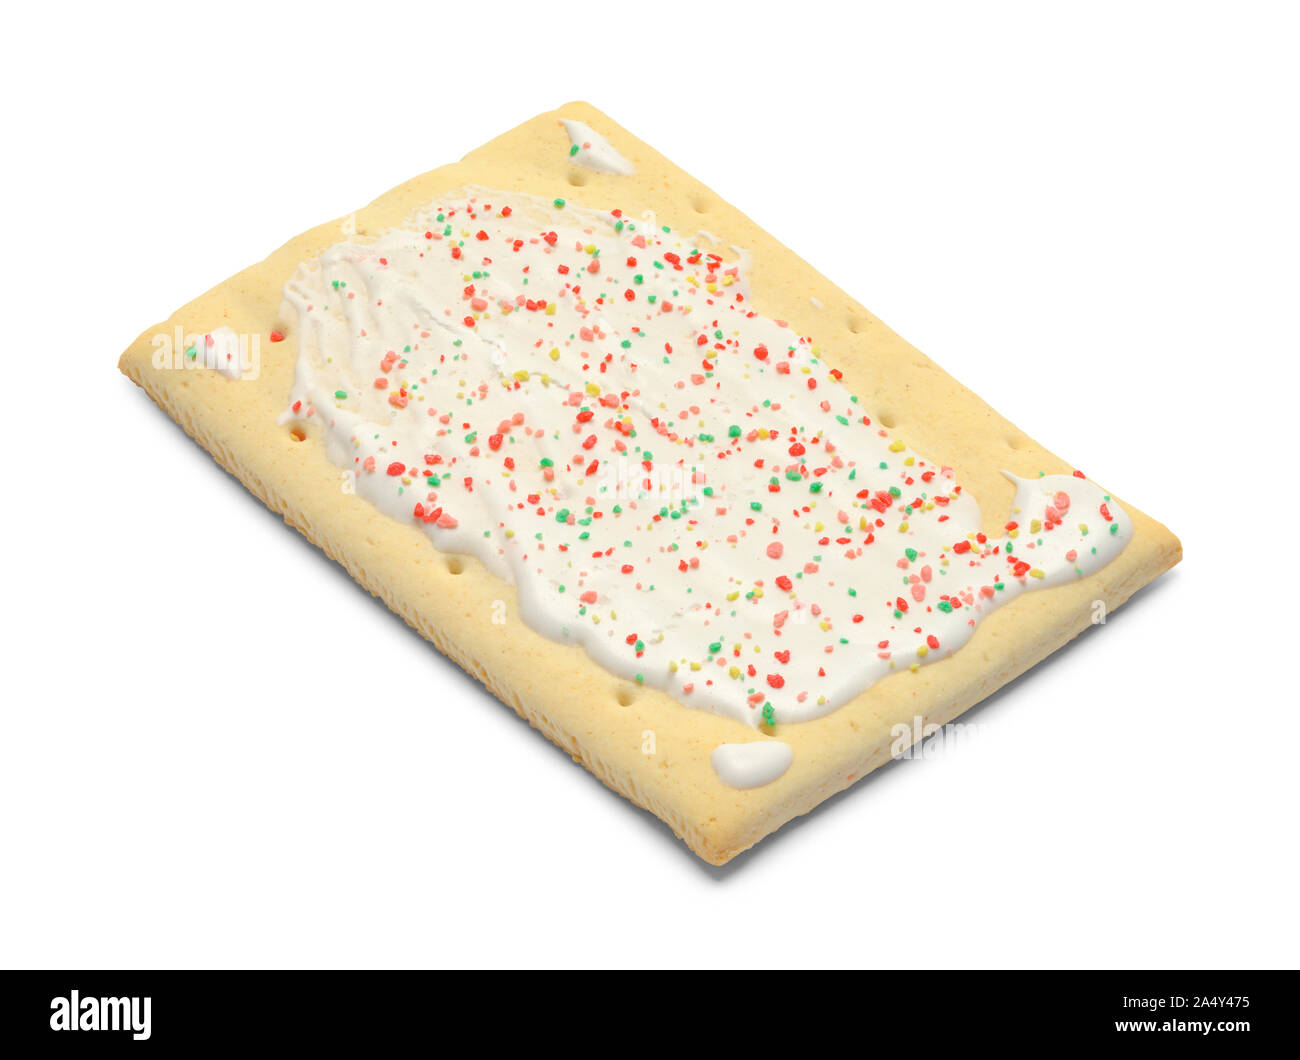 Toaster Pastry  With Sprinkles Isolated on White. Stock Photo